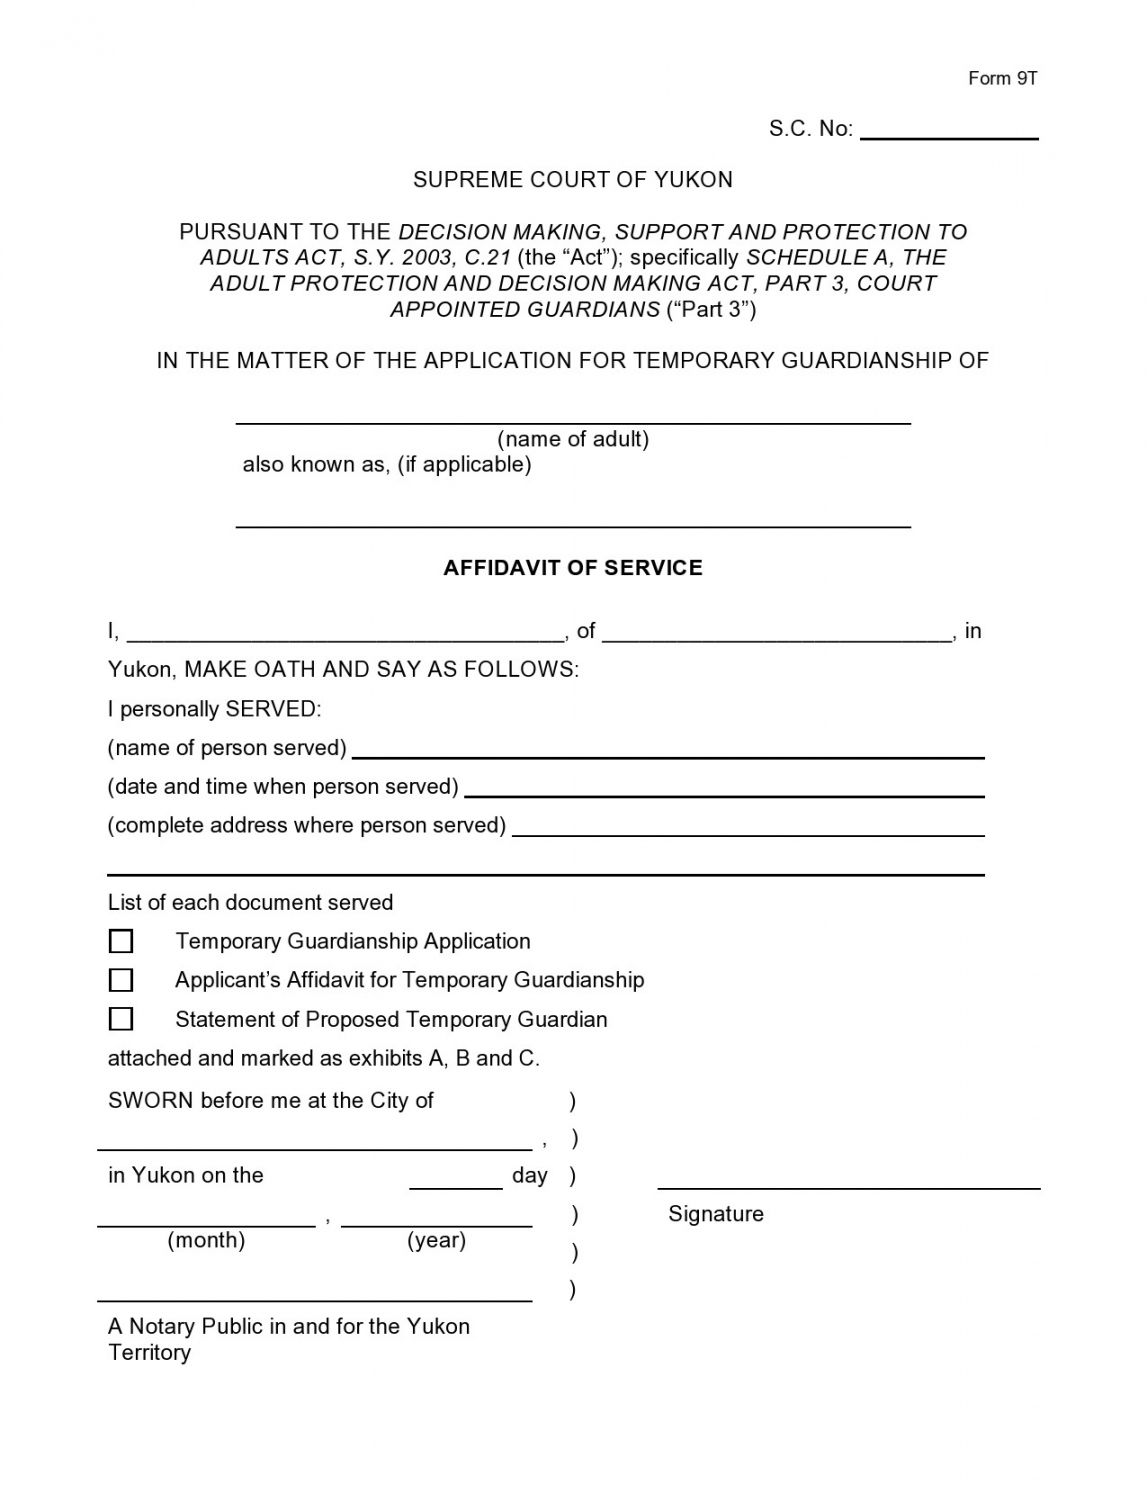 Free Guardianship Forms [Temporary / Permanent] ᐅ TemplateLab - FREE Printables - Free Printable Child Guardianship Forms In Case Of Death